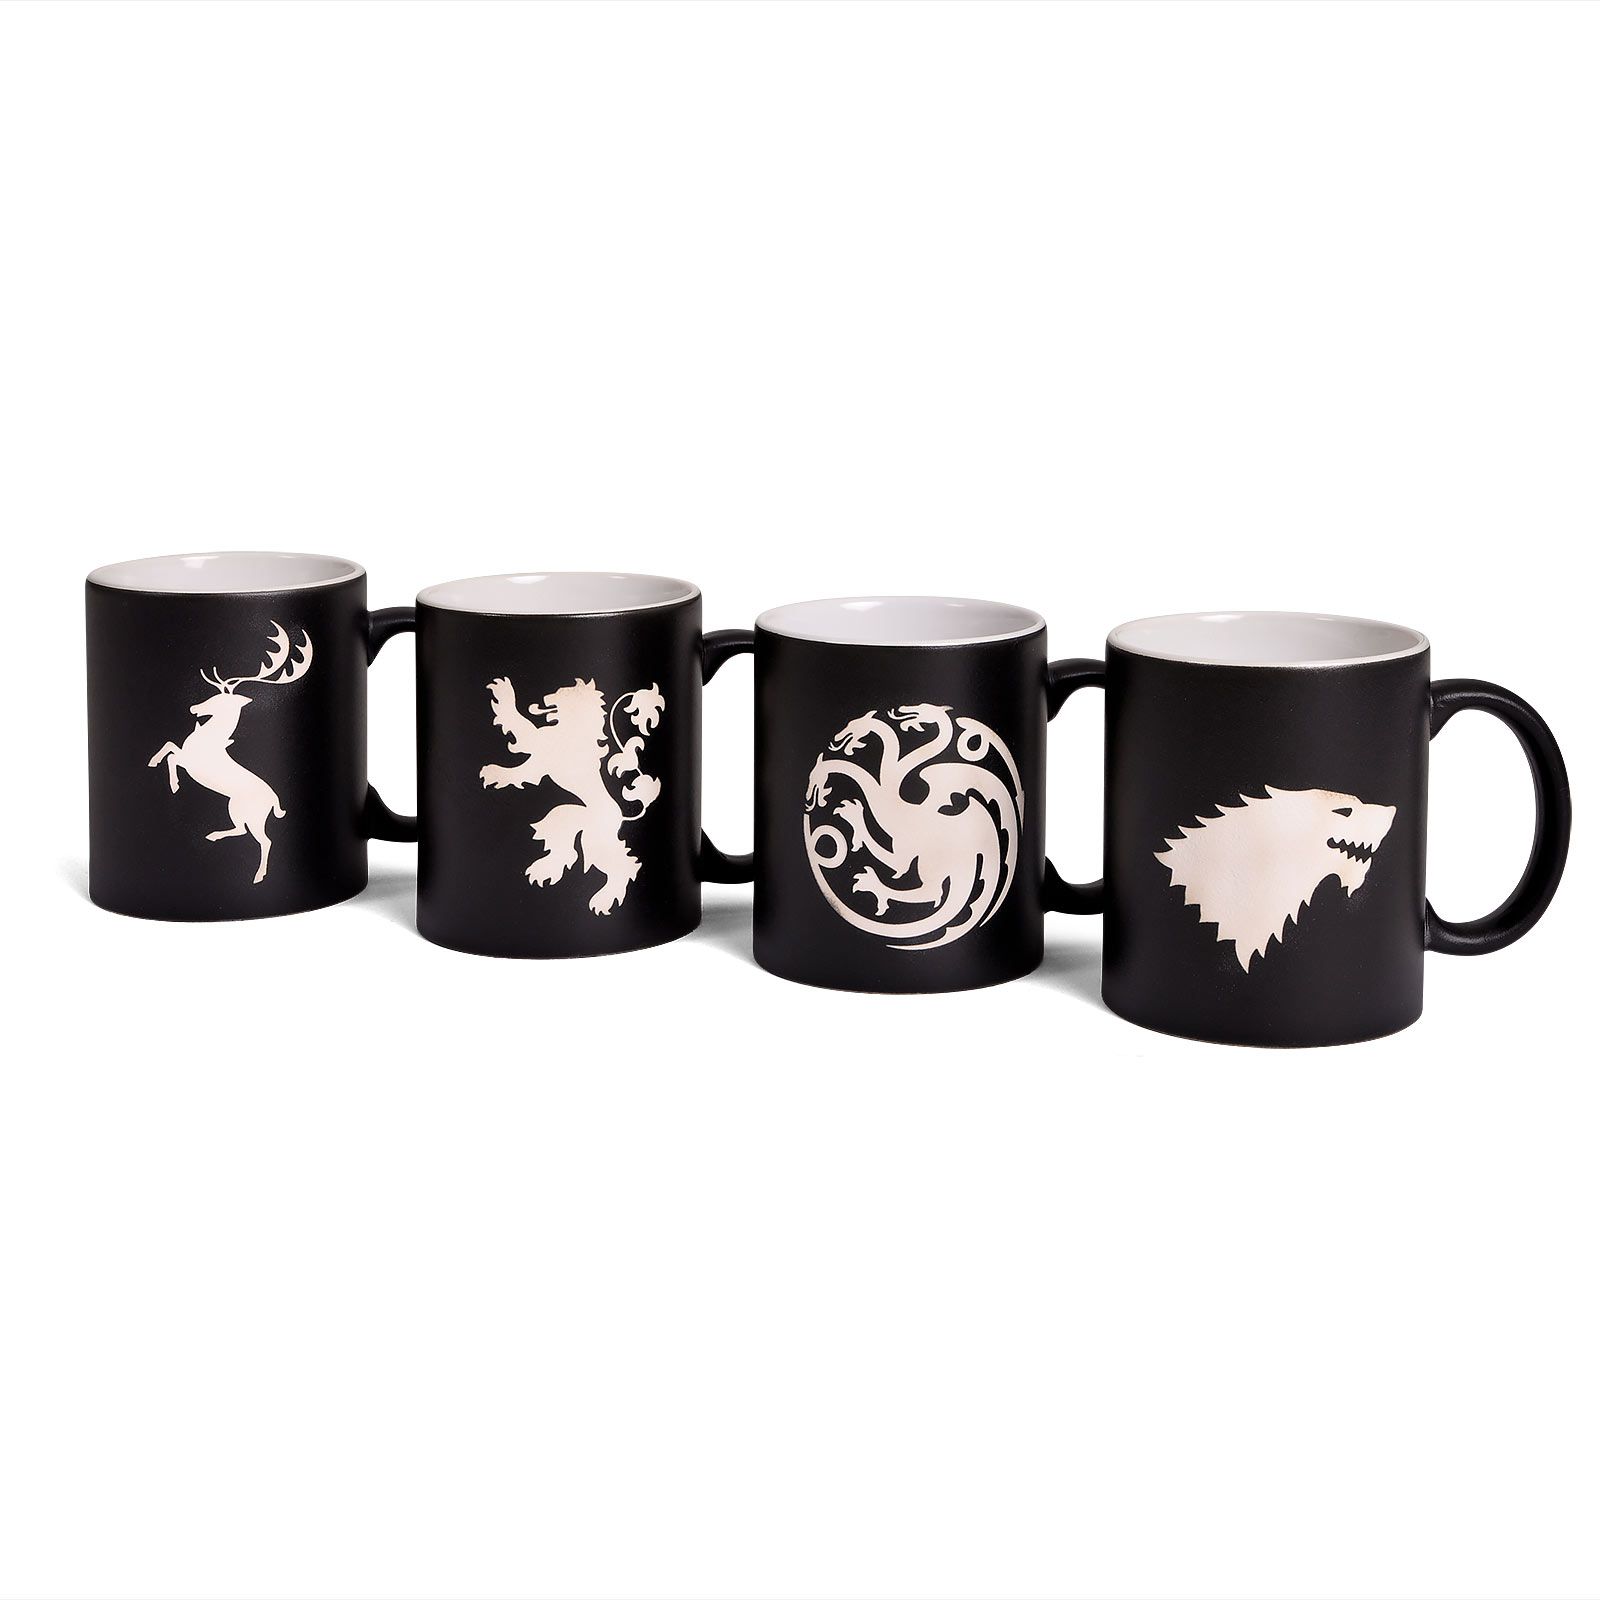 Game of Thrones - Coat of Arms Deluxe Mug Set Limited Edition